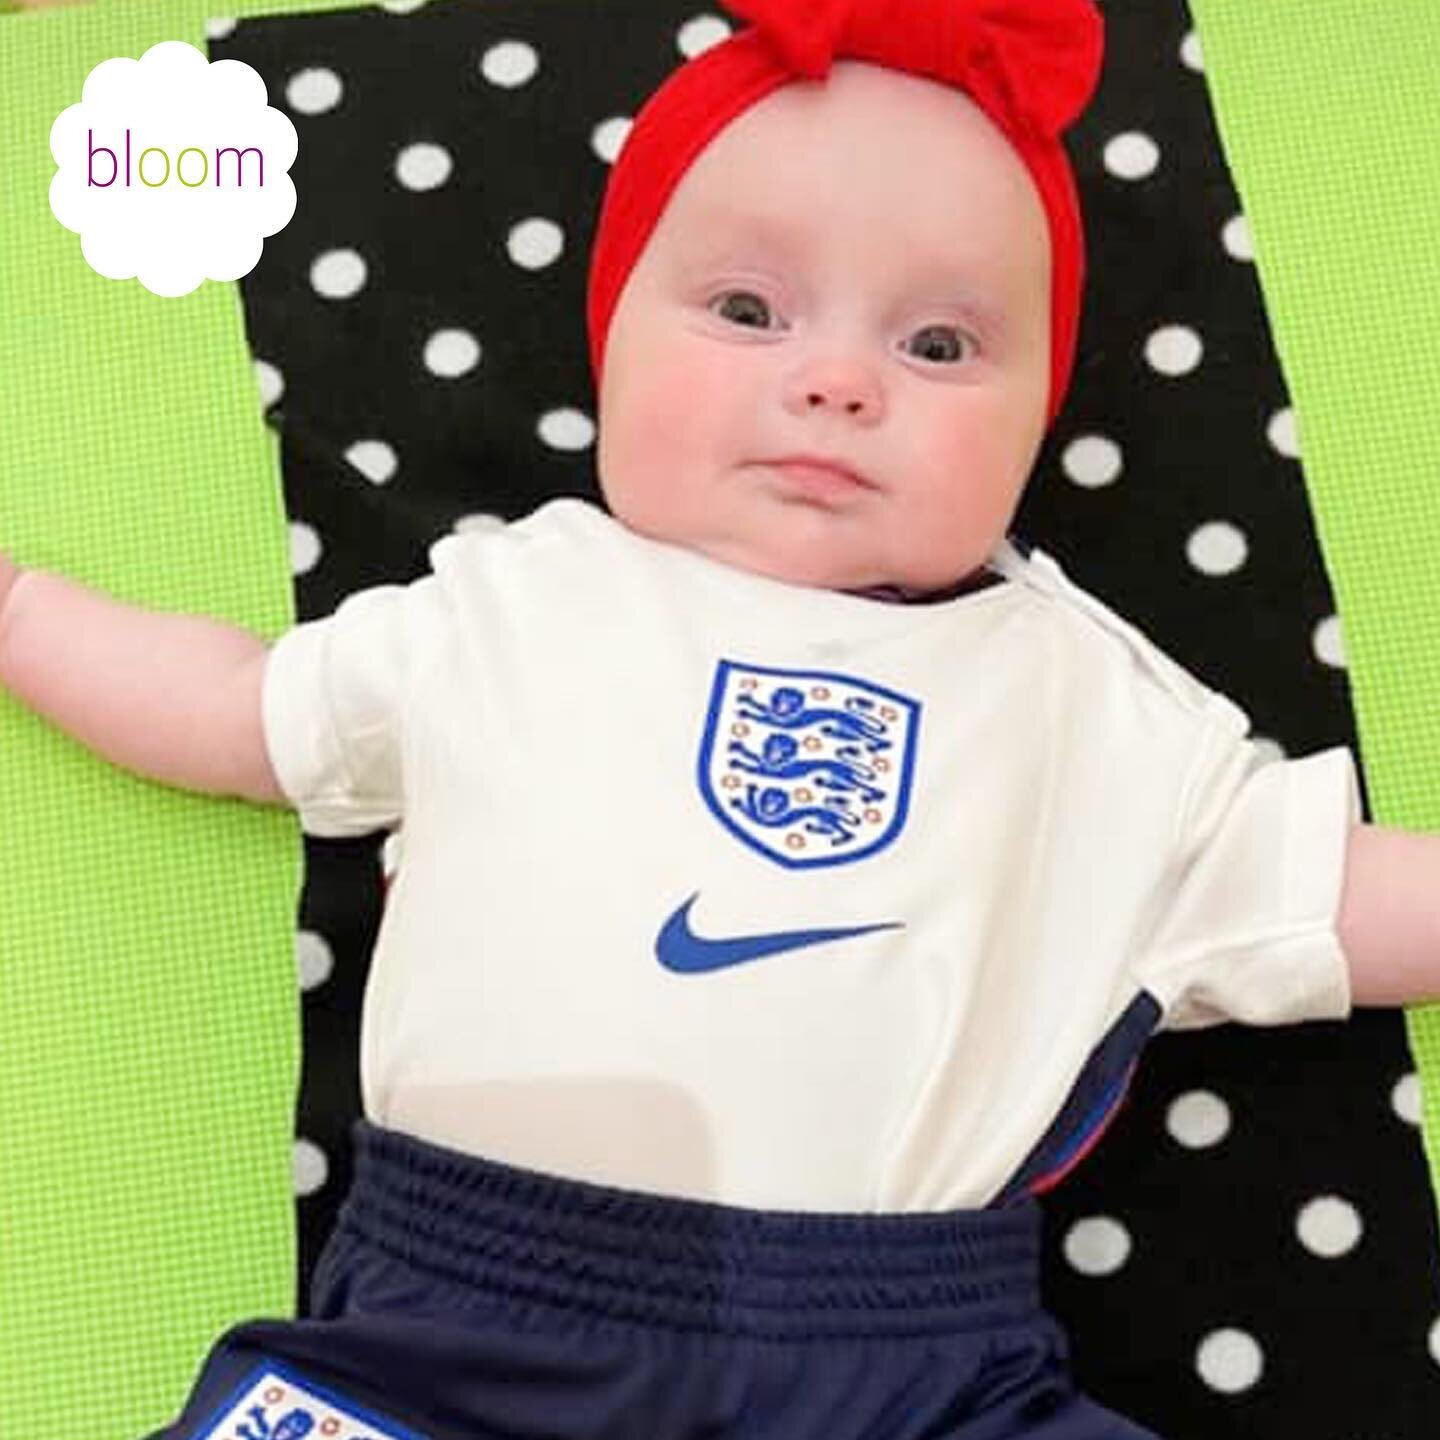 Football&rsquo;s Coming Home ⚽️

Will you be watching? What do you think the score will be come in people place your bets!! ⭐️
.
.
.
.
.
#footballscominghome #comeonengland #euros2021 #footballfever #babydevelopmentclasses #bloombabyclass #eurofinal 